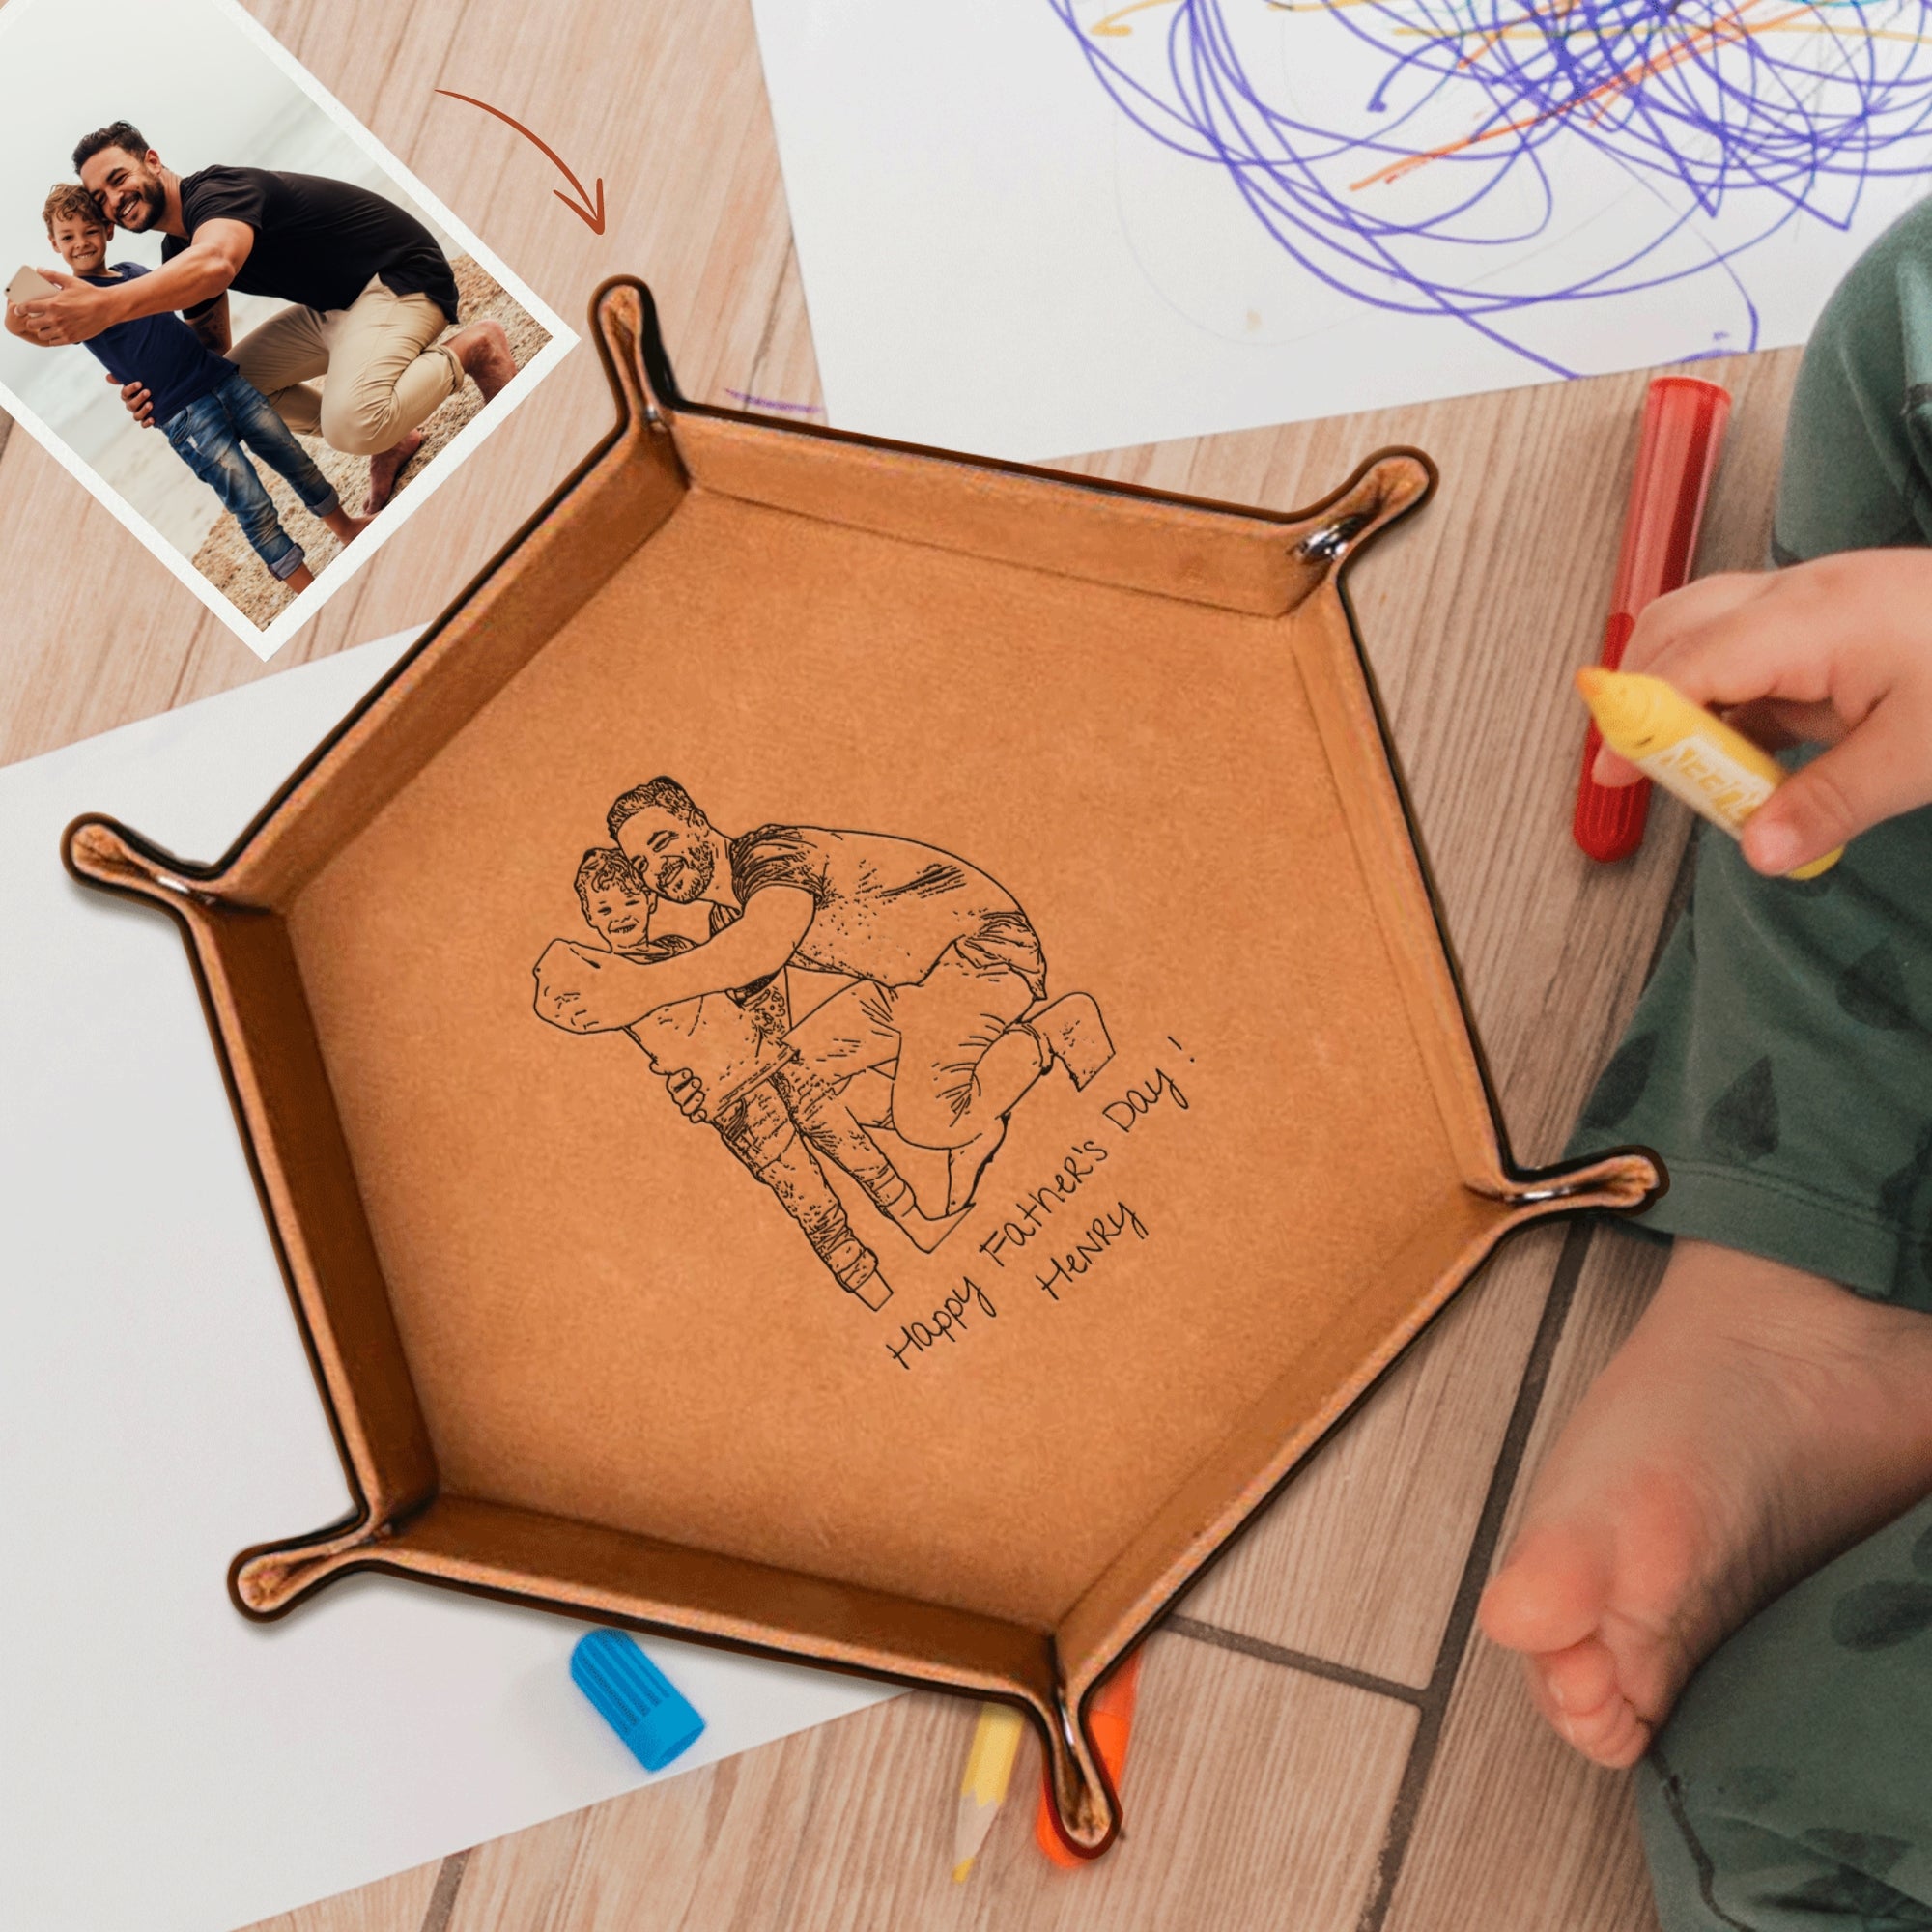 Personalised Your Kid Hand Drawing, Sketch Photo Hexagon Leather Catchall Tray, Custom Engraved Valet Storage, Desk Caddy Organiser Dad Gift